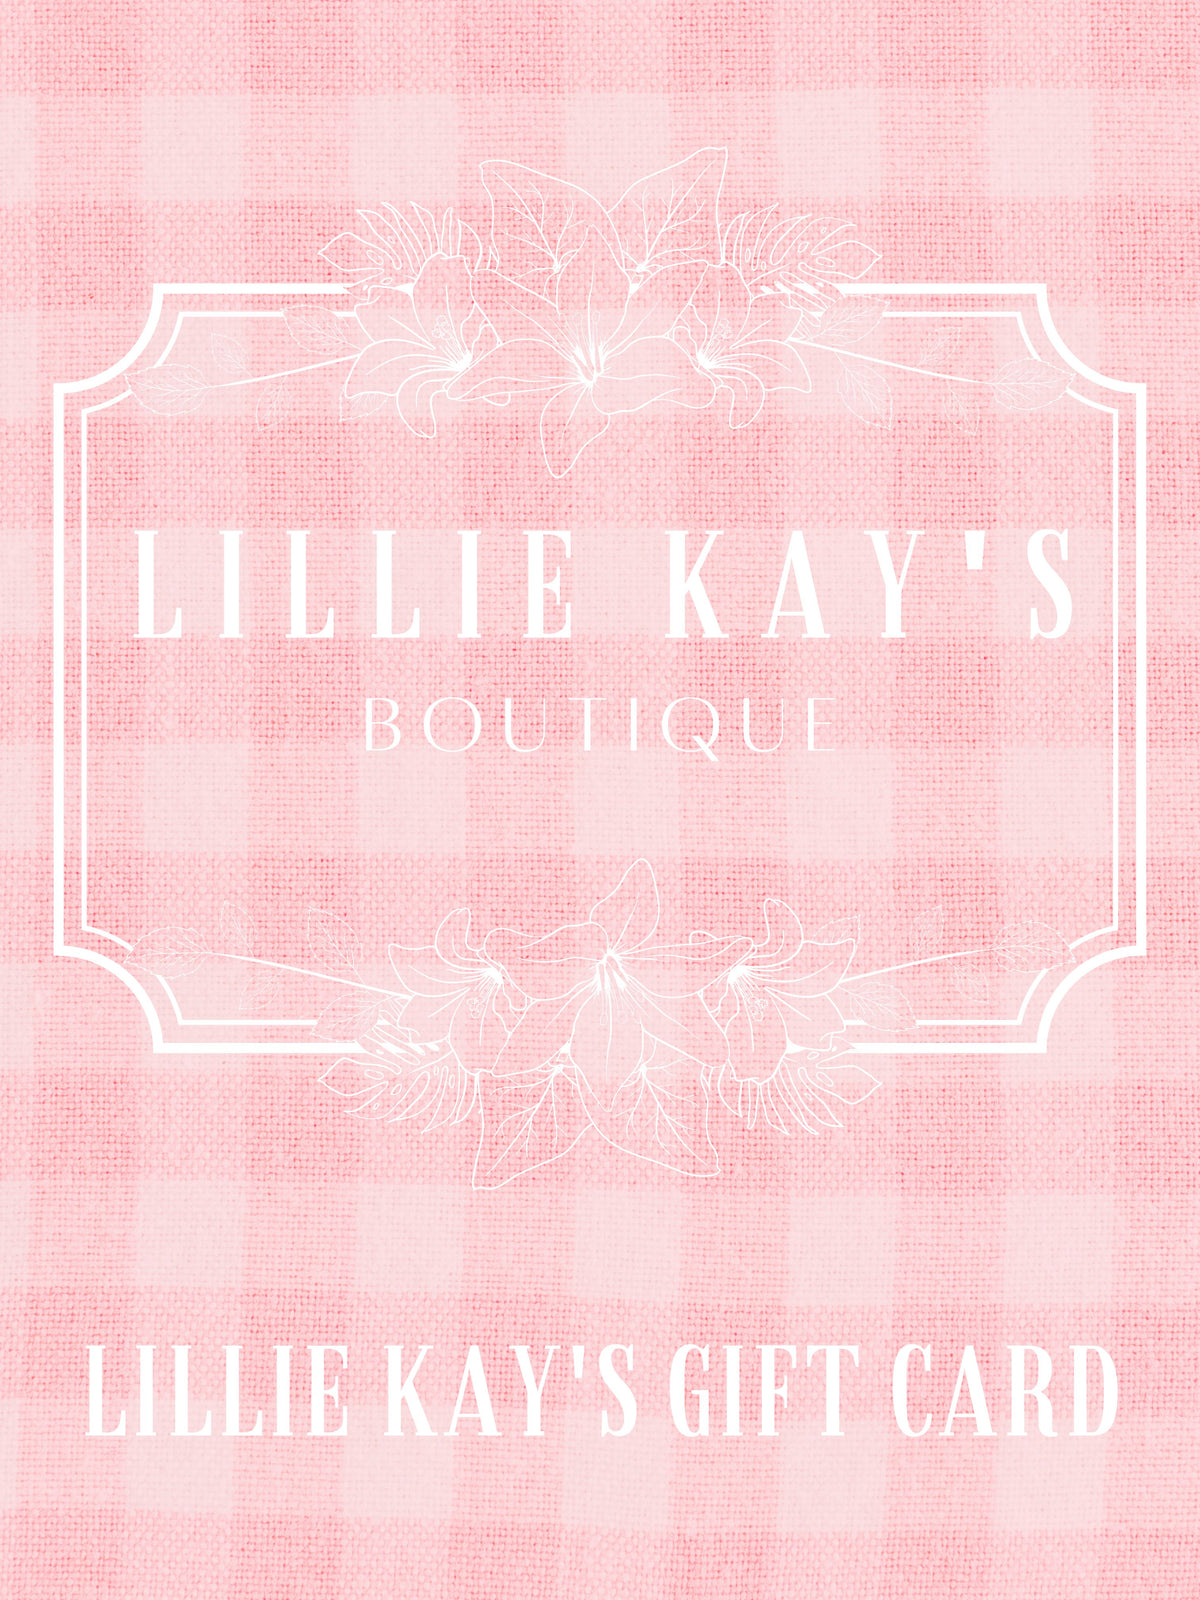 lillie kays boutique gift card